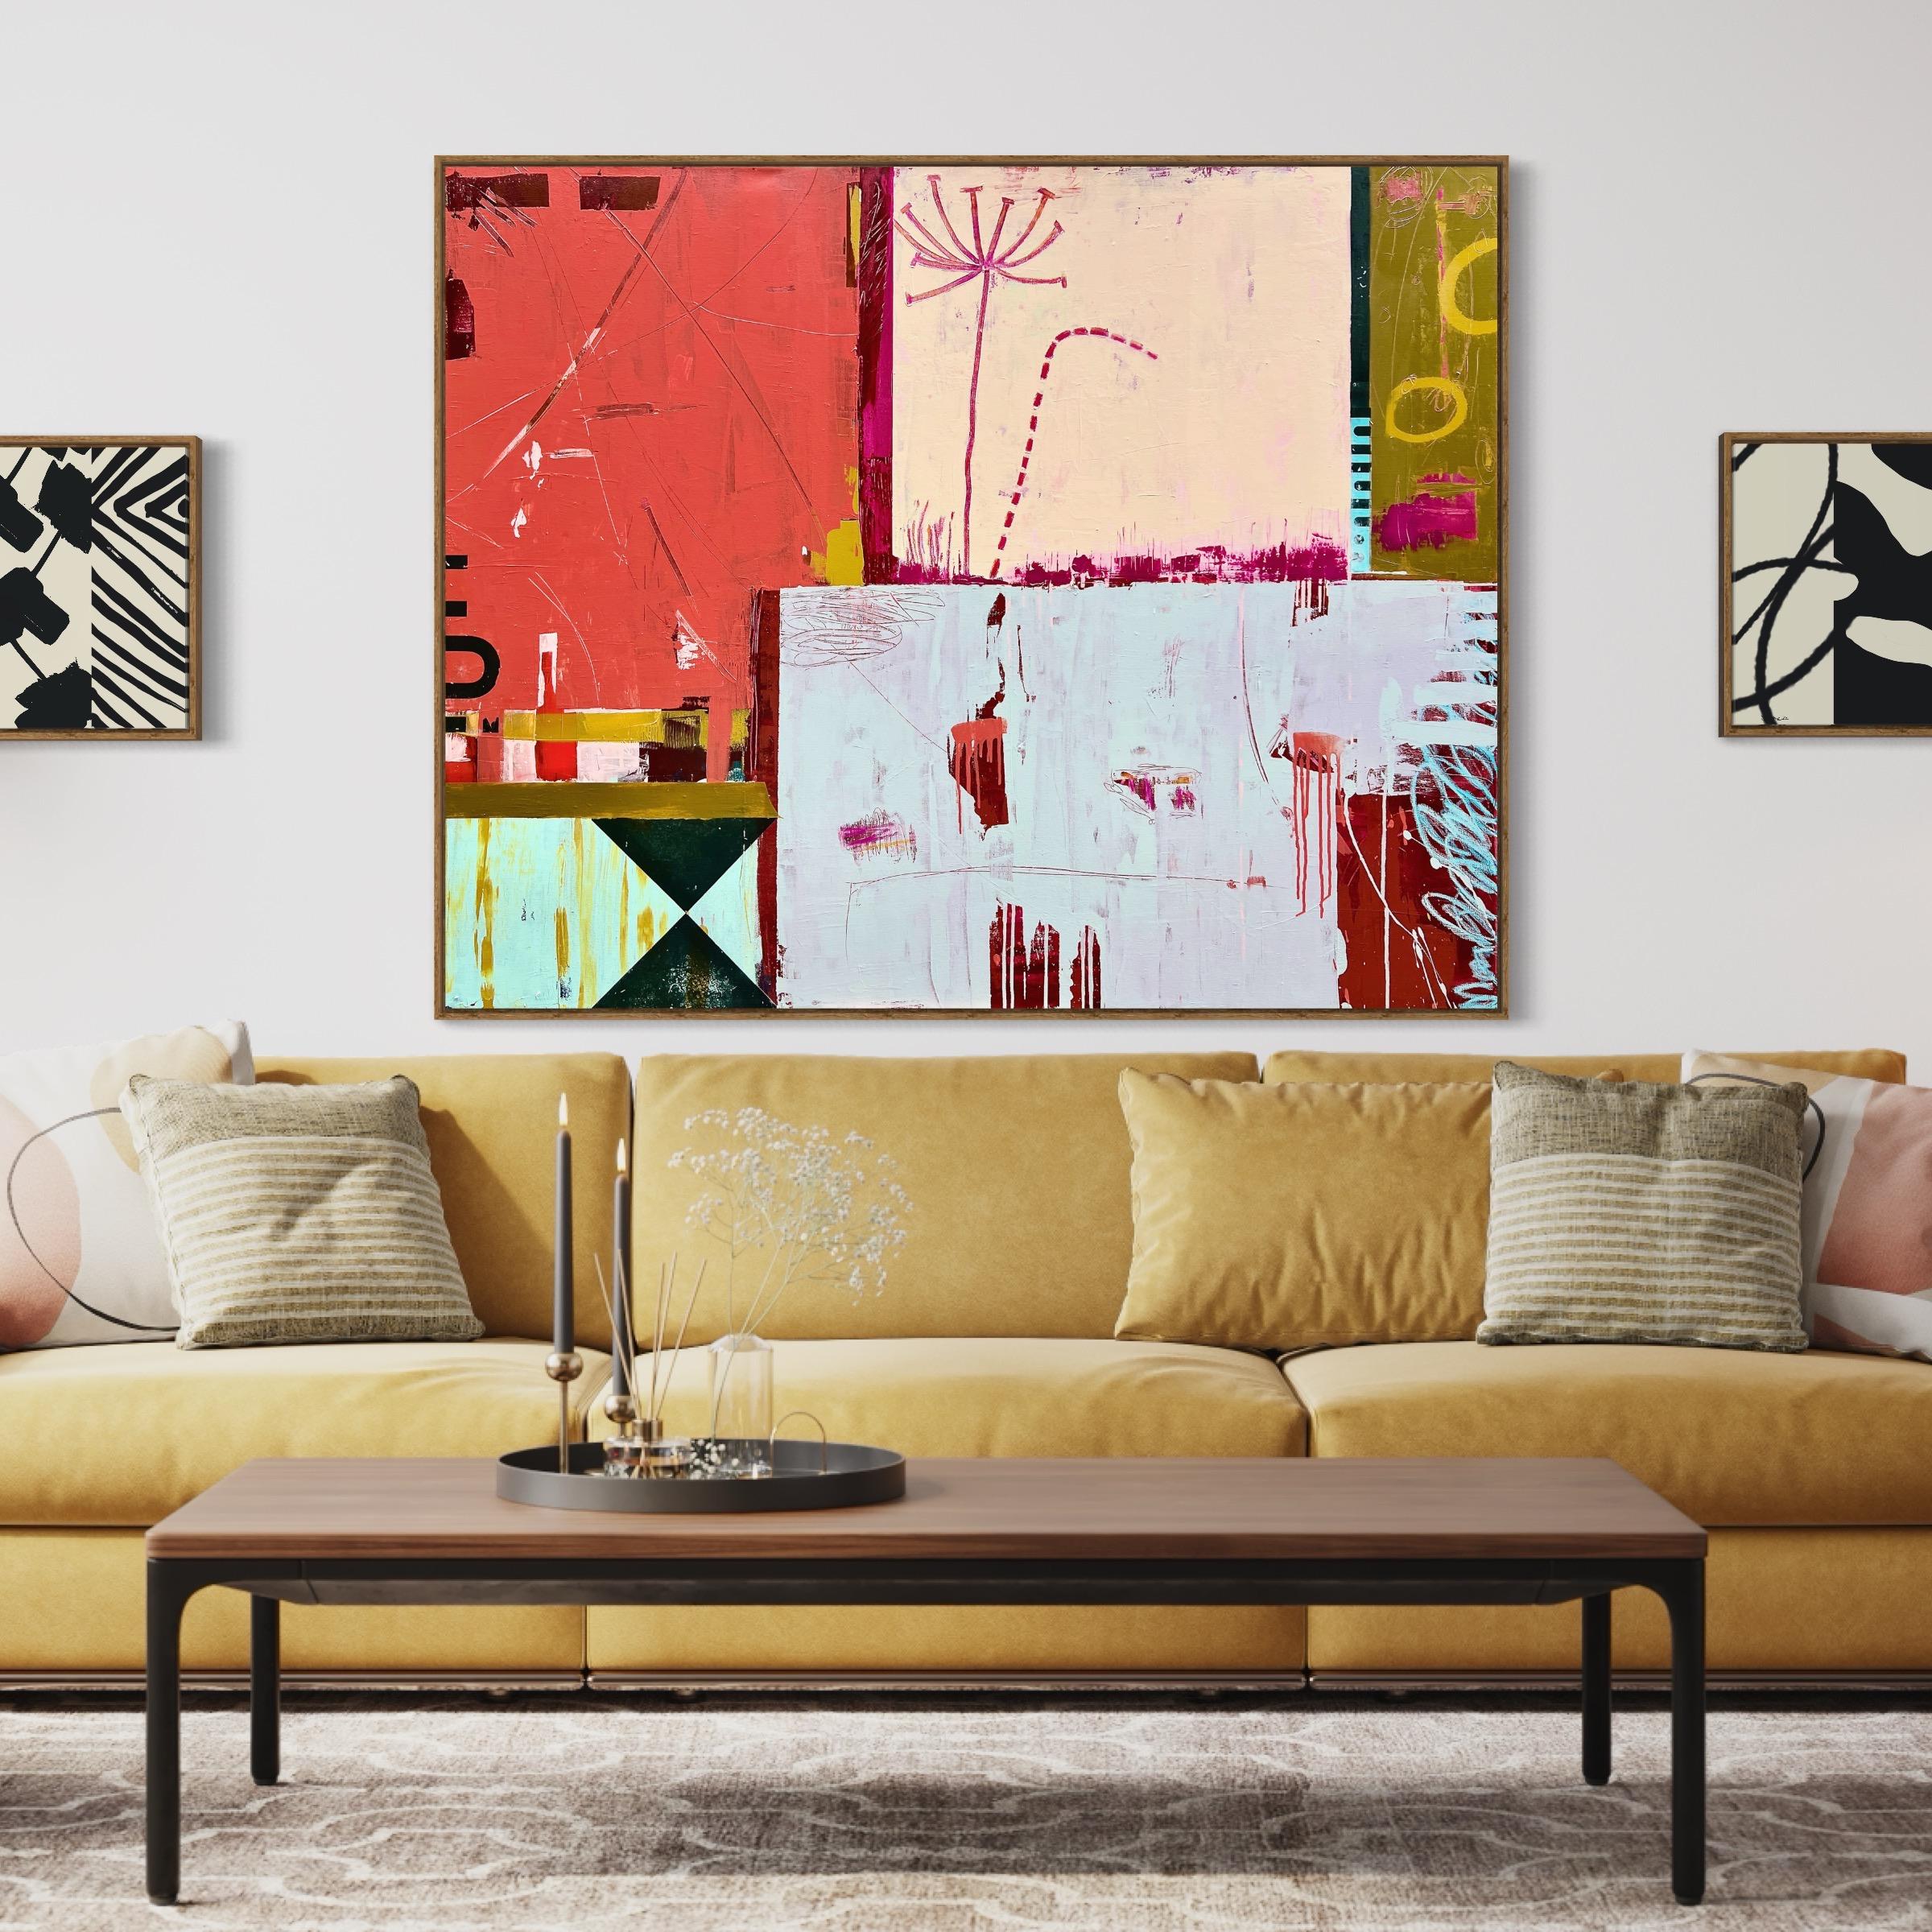 Harvest Moon, Original Contemporary Abstract Mixed Media Painting on Canvas
48x60x1.5 (HxWxD), Mixed Media

A series of loose rectangles overlap one another in this large format mixed media painting by artist Sarah Finucane. The paint sits thick on